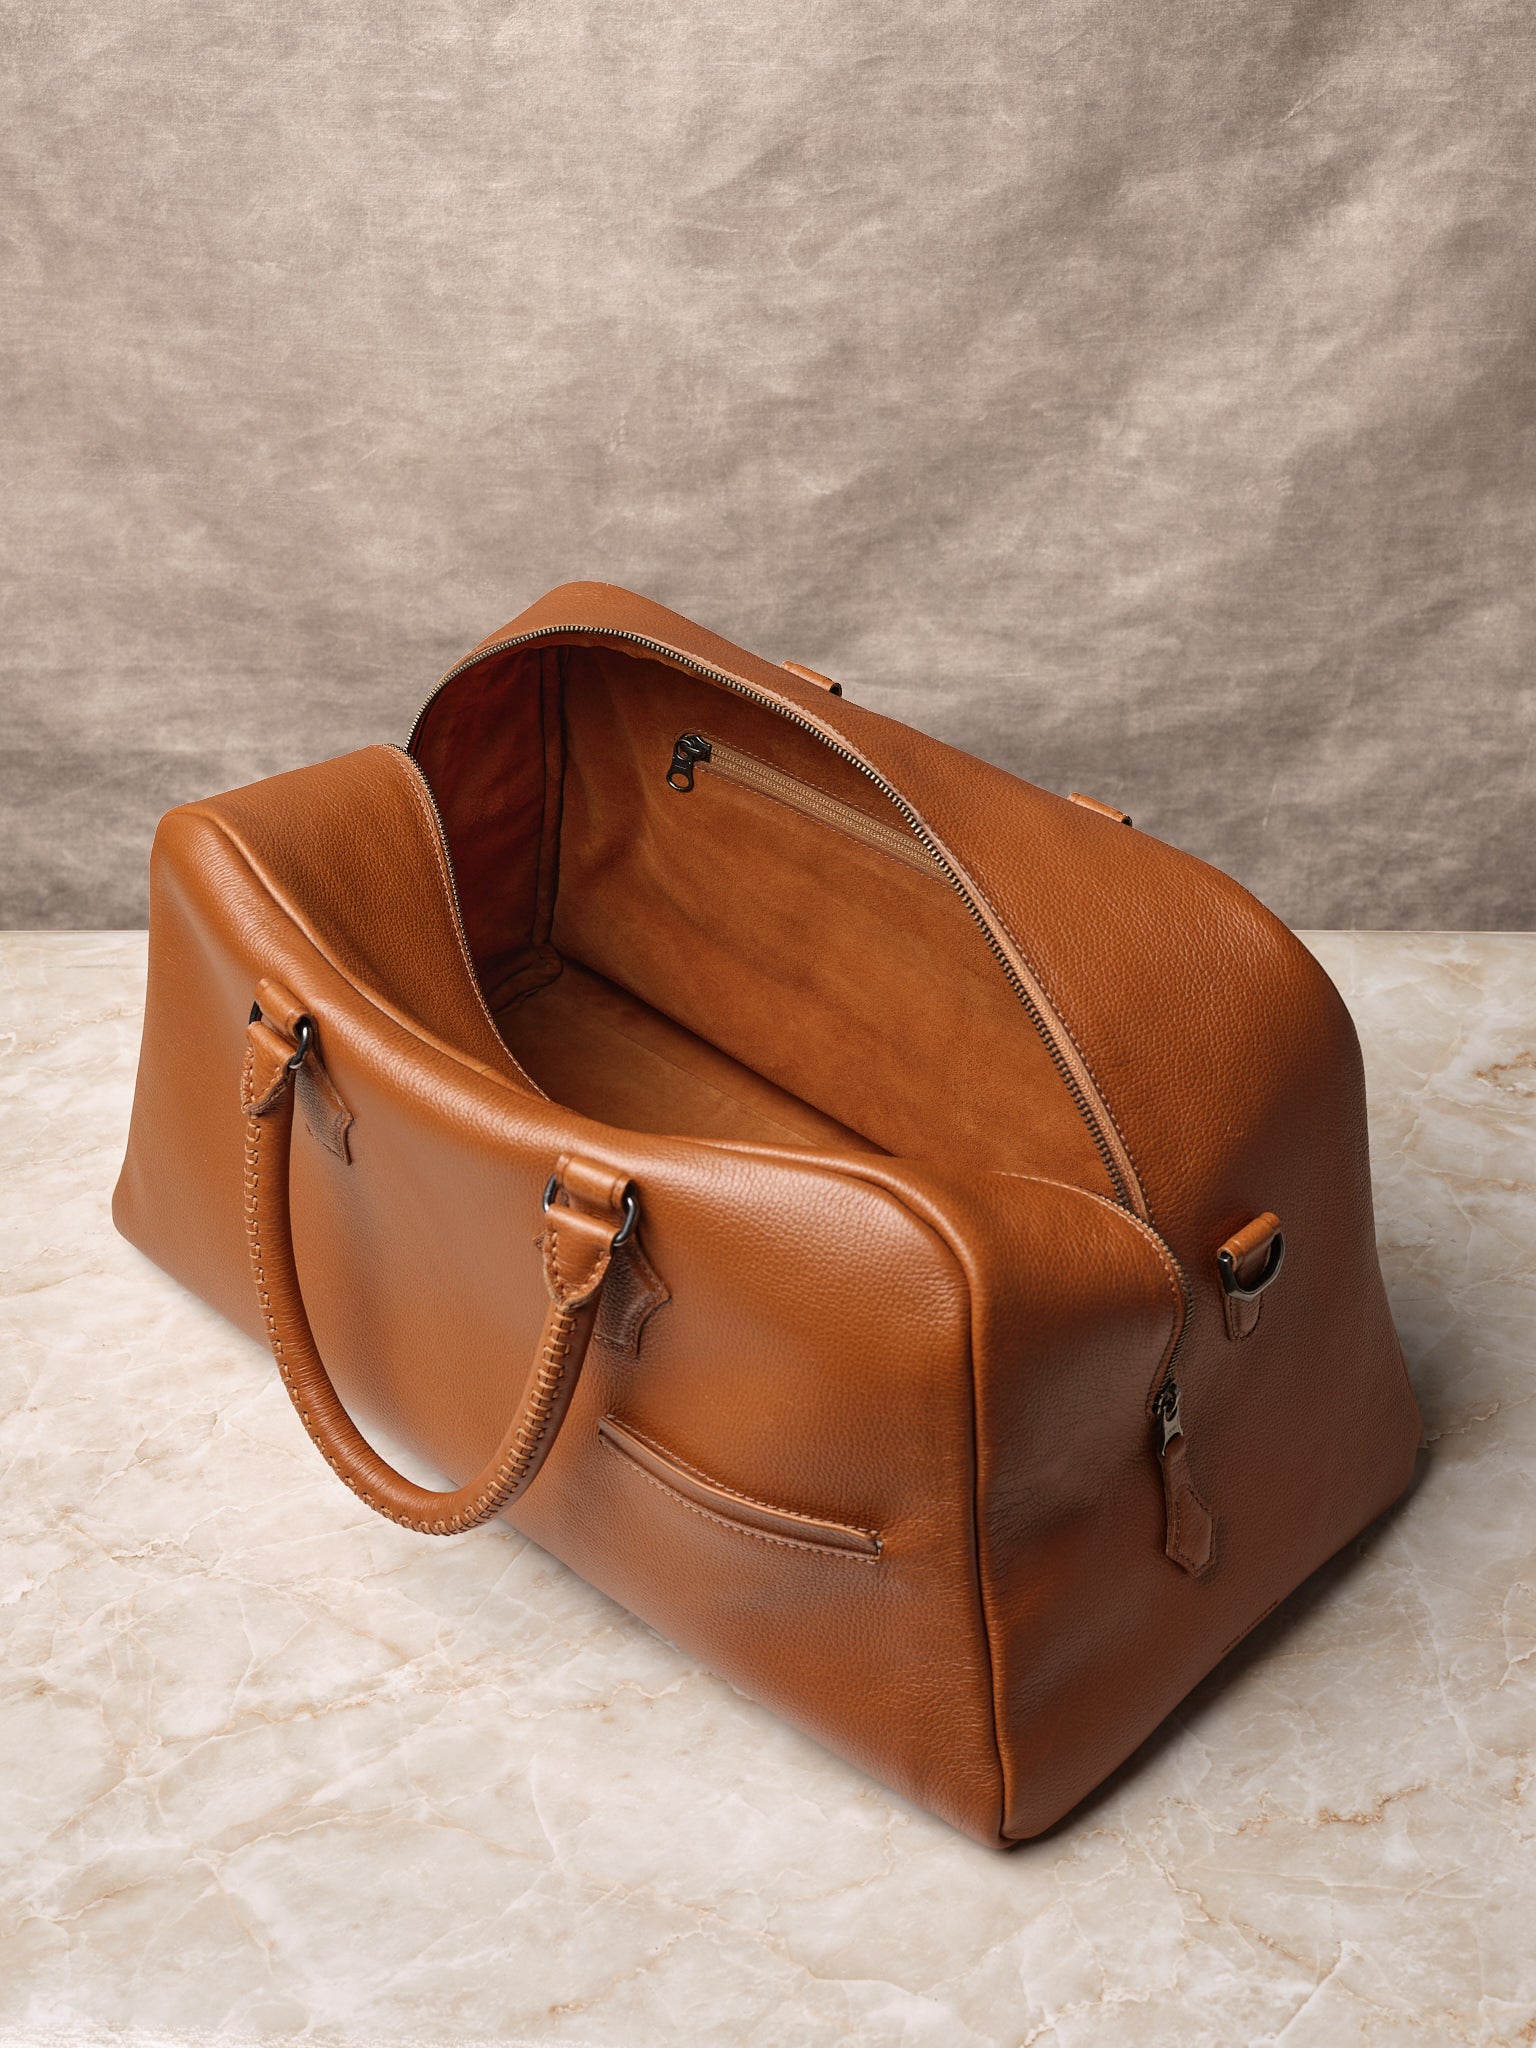 Suede Lining. Duffle Bag for Men Tan by Capra Leather